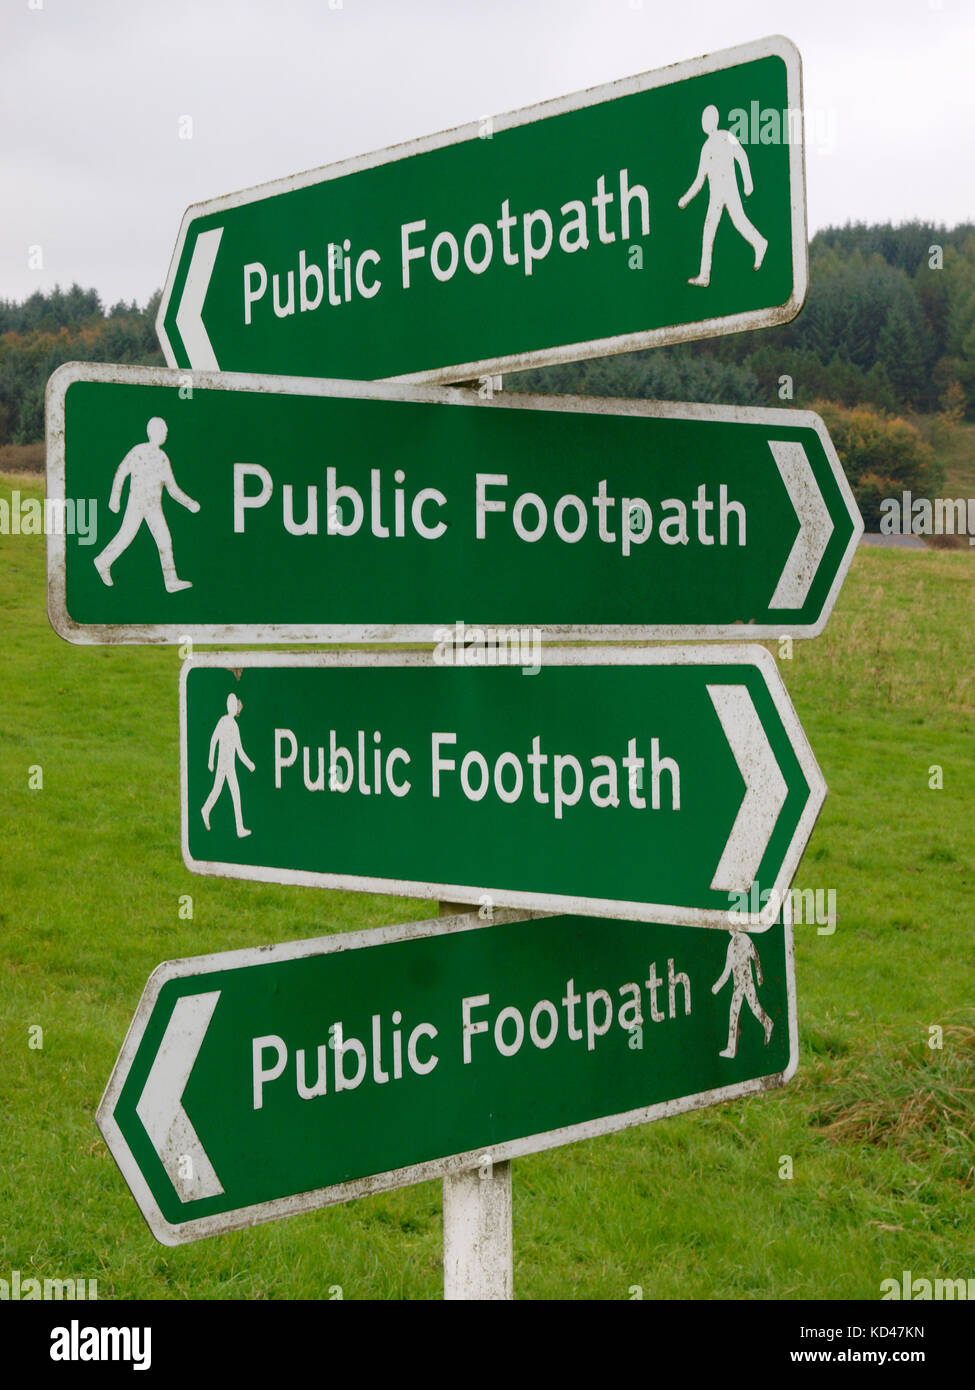 Four public footpath signs pointing in different directions on the same pole, Buxton, The Peak District, Derbyshire, UK Stock Photo